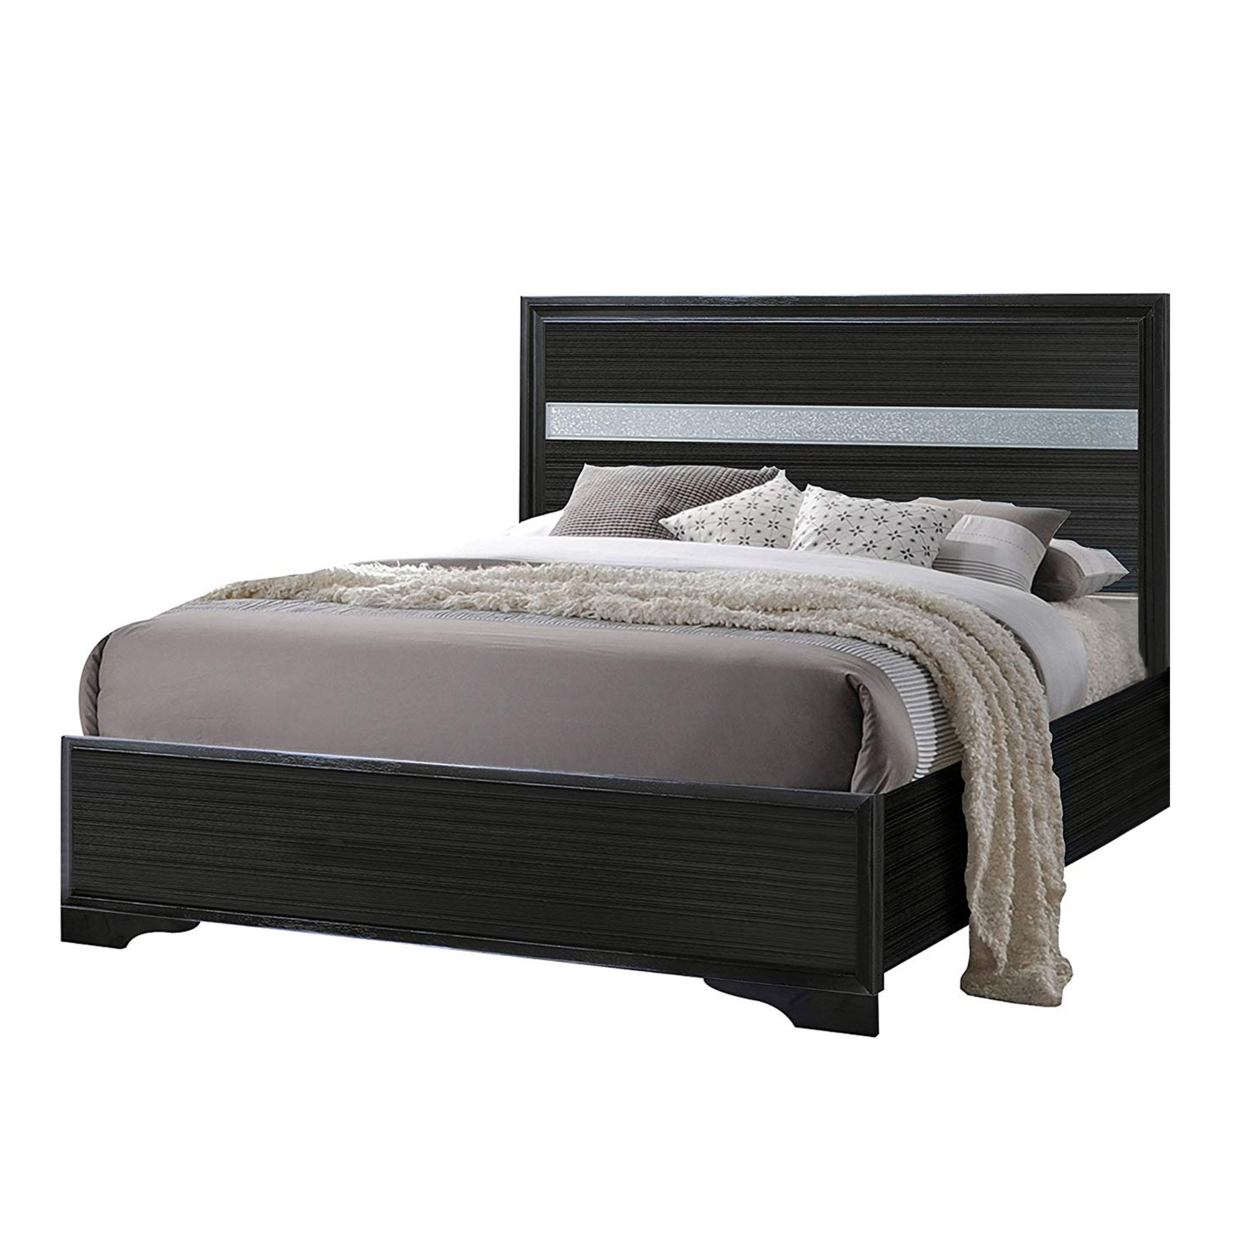 Wooden Twin Size Bed With Bracket Legs And Crystal Accented Headboard, Black- Saltoro Sherpi